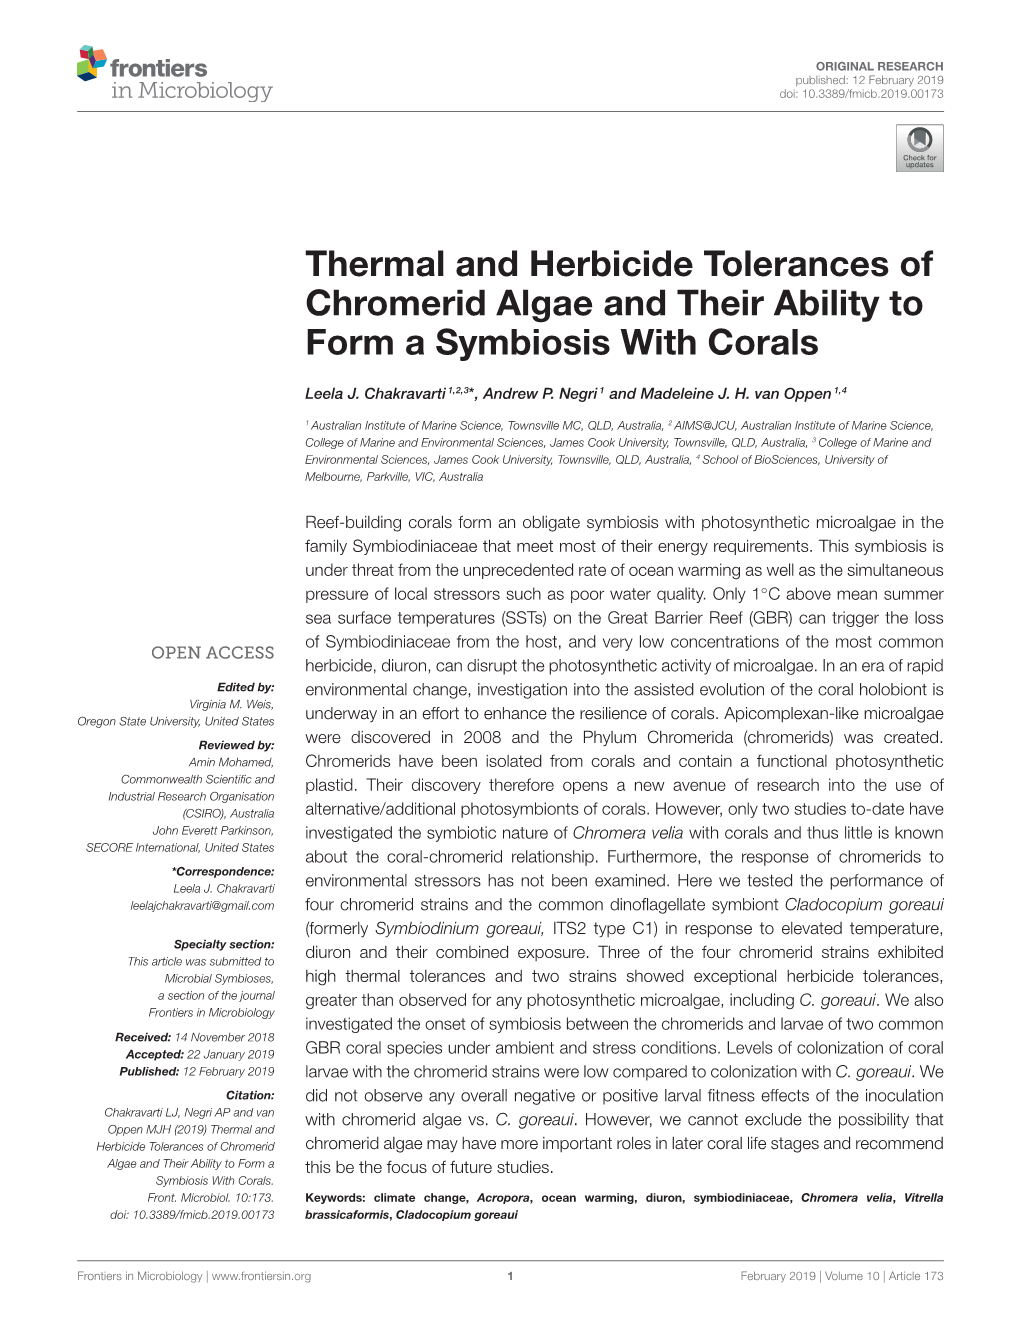 Thermal and Herbicide Tolerances of Chromerid Algae and Their Ability to Form a Symbiosis with Corals